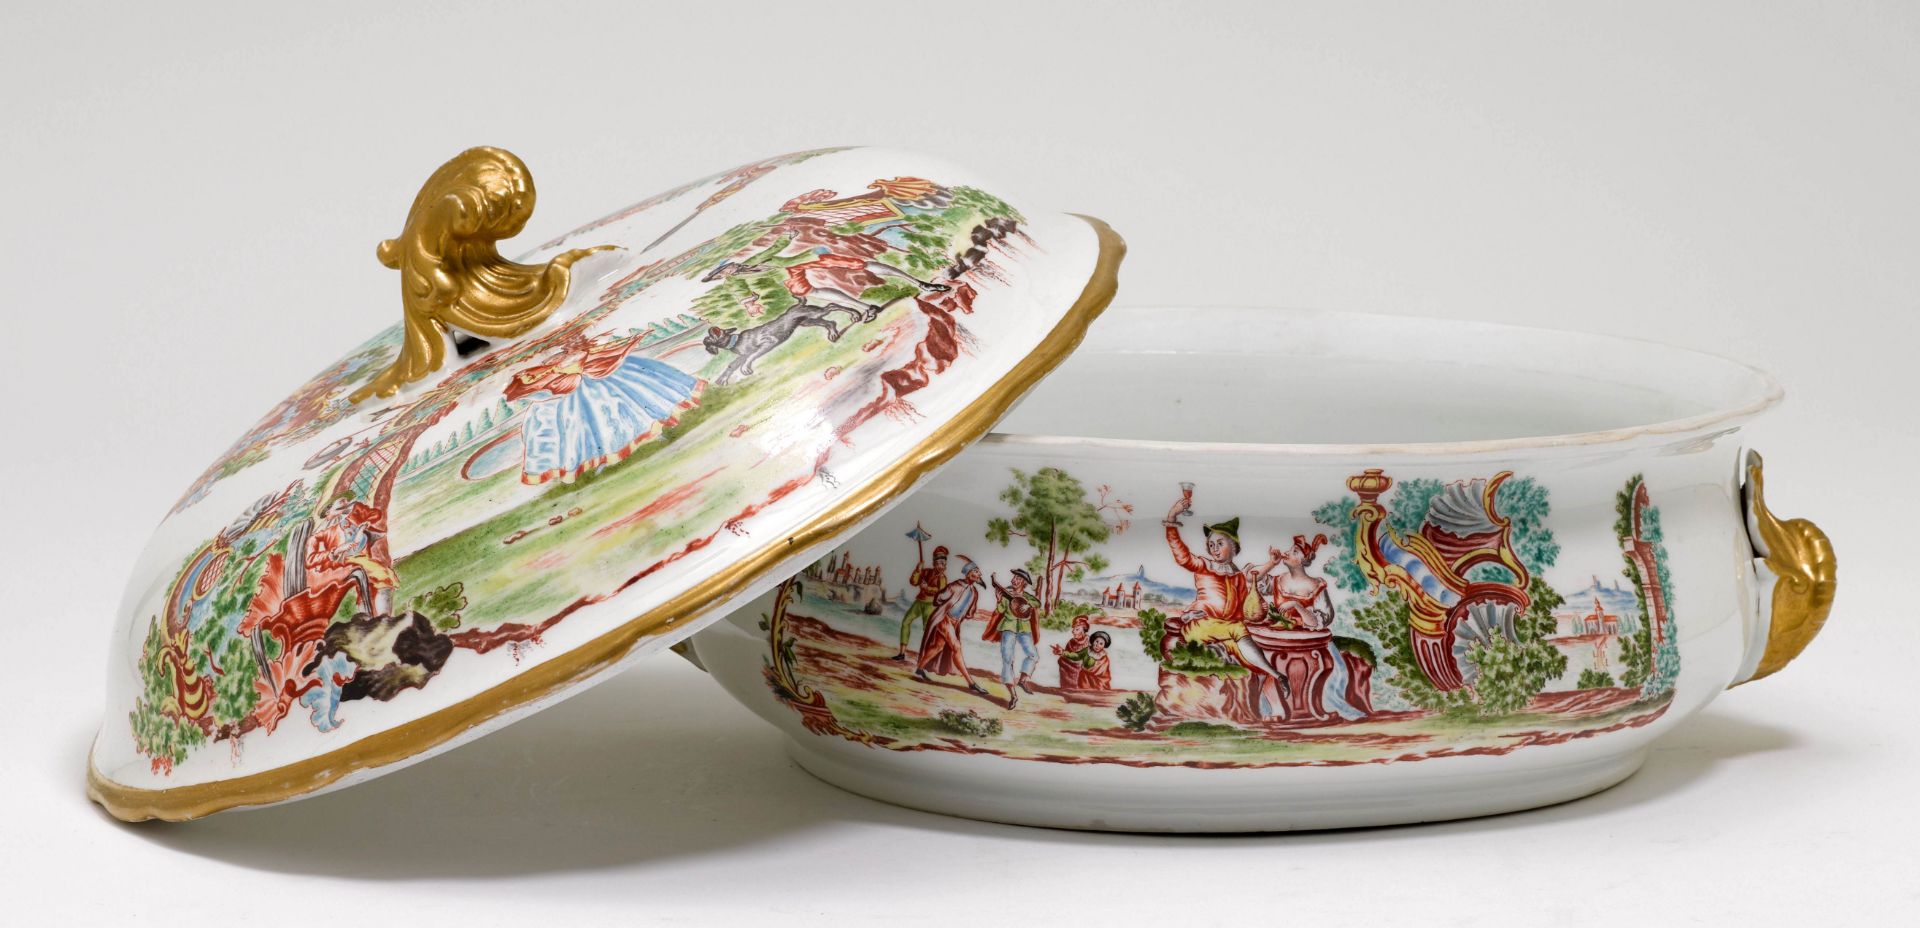 A LARGE TUREEN WITH "FÈTE GALANTES” HAUSMALER DECORATION - Image 3 of 5